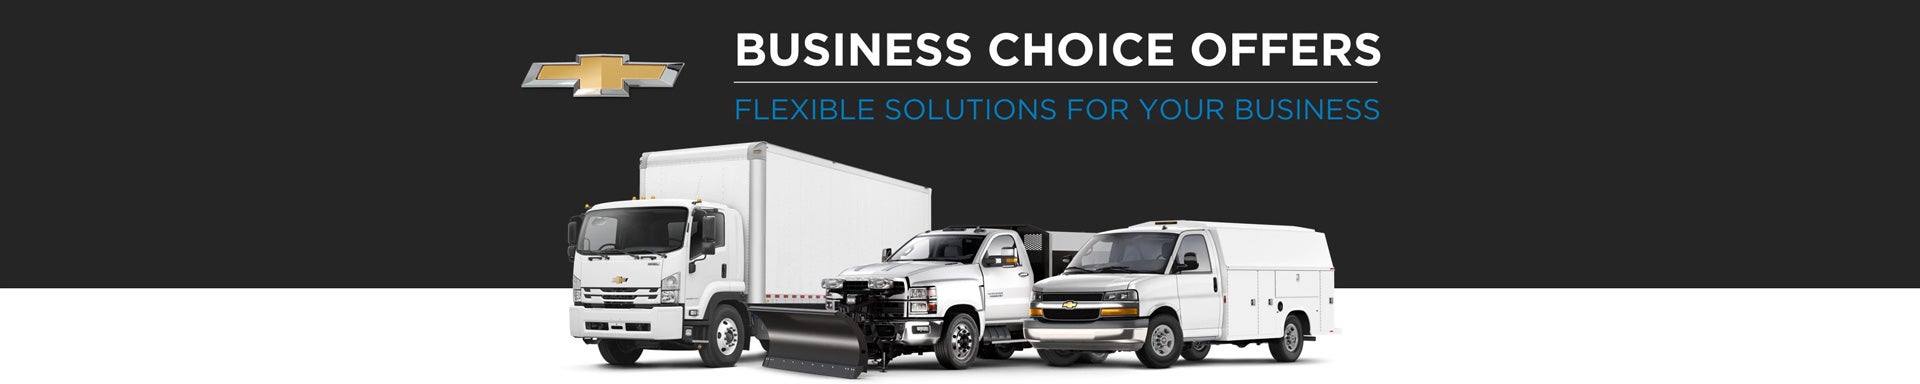 Chevrolet Business Choice Offers - Flexible Solutions for your Business - Schepel Buick GMC in Merrillville IN